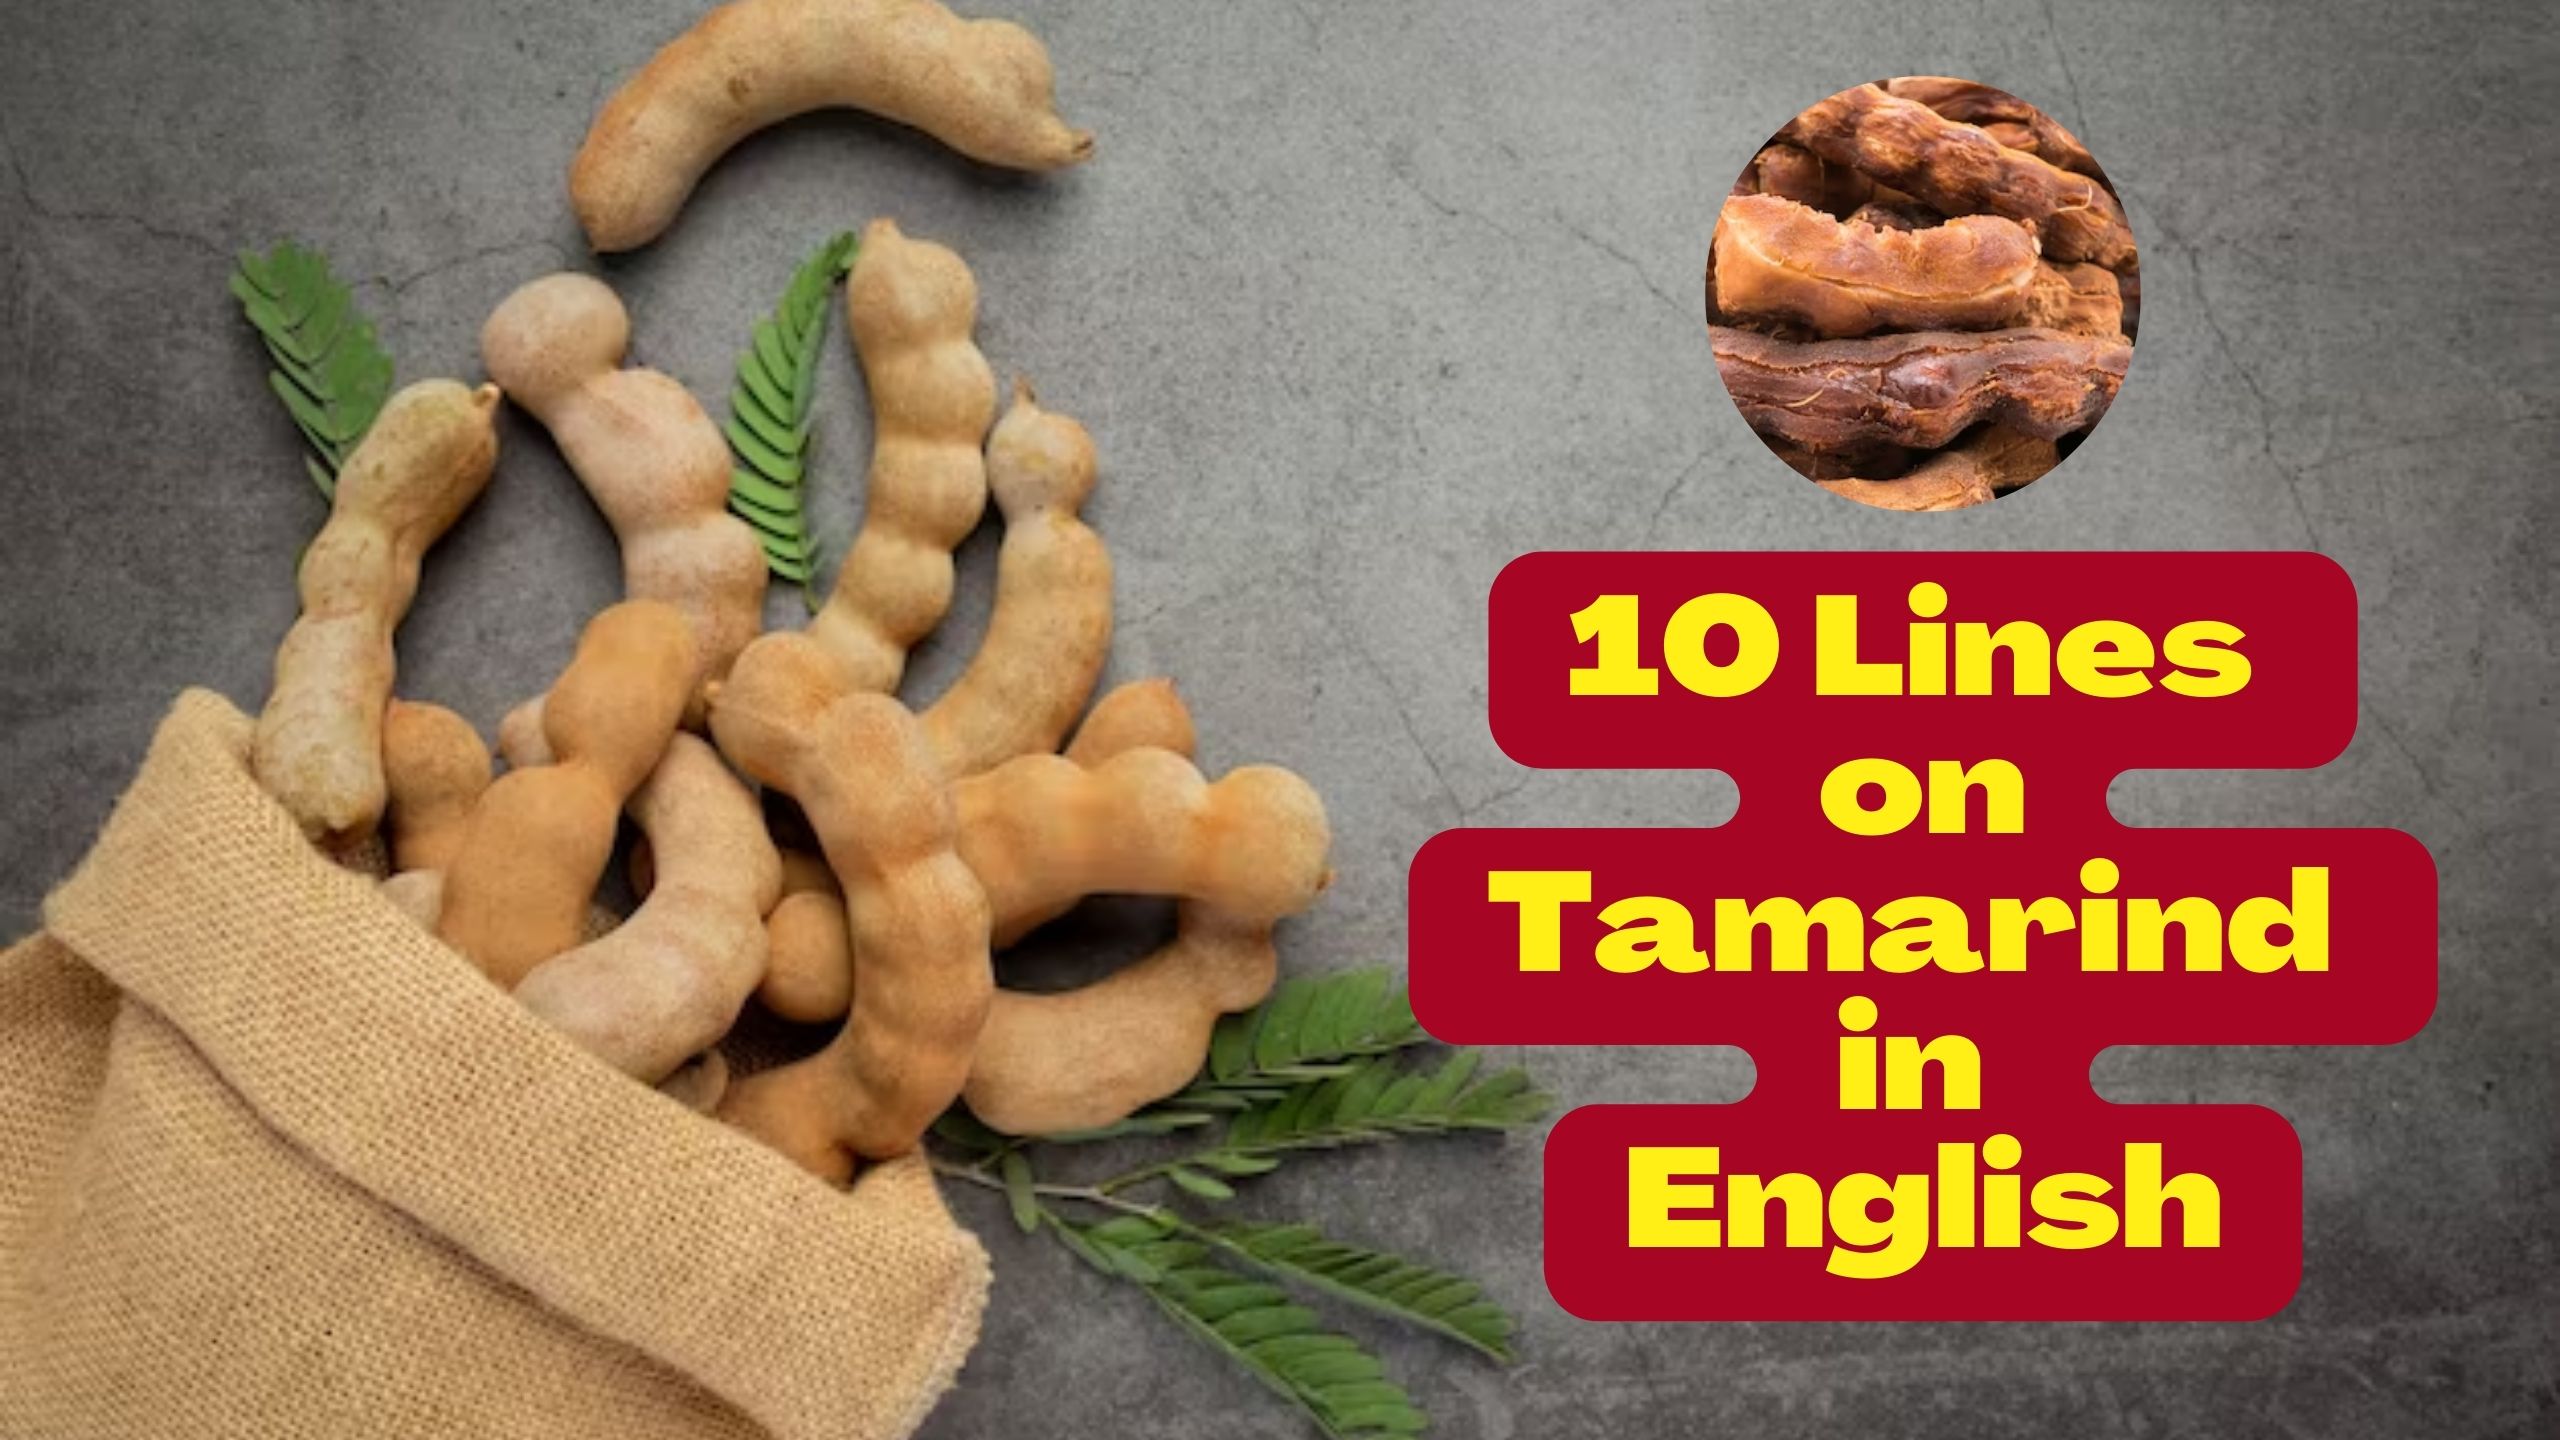 10 Lines on Tamarind in English